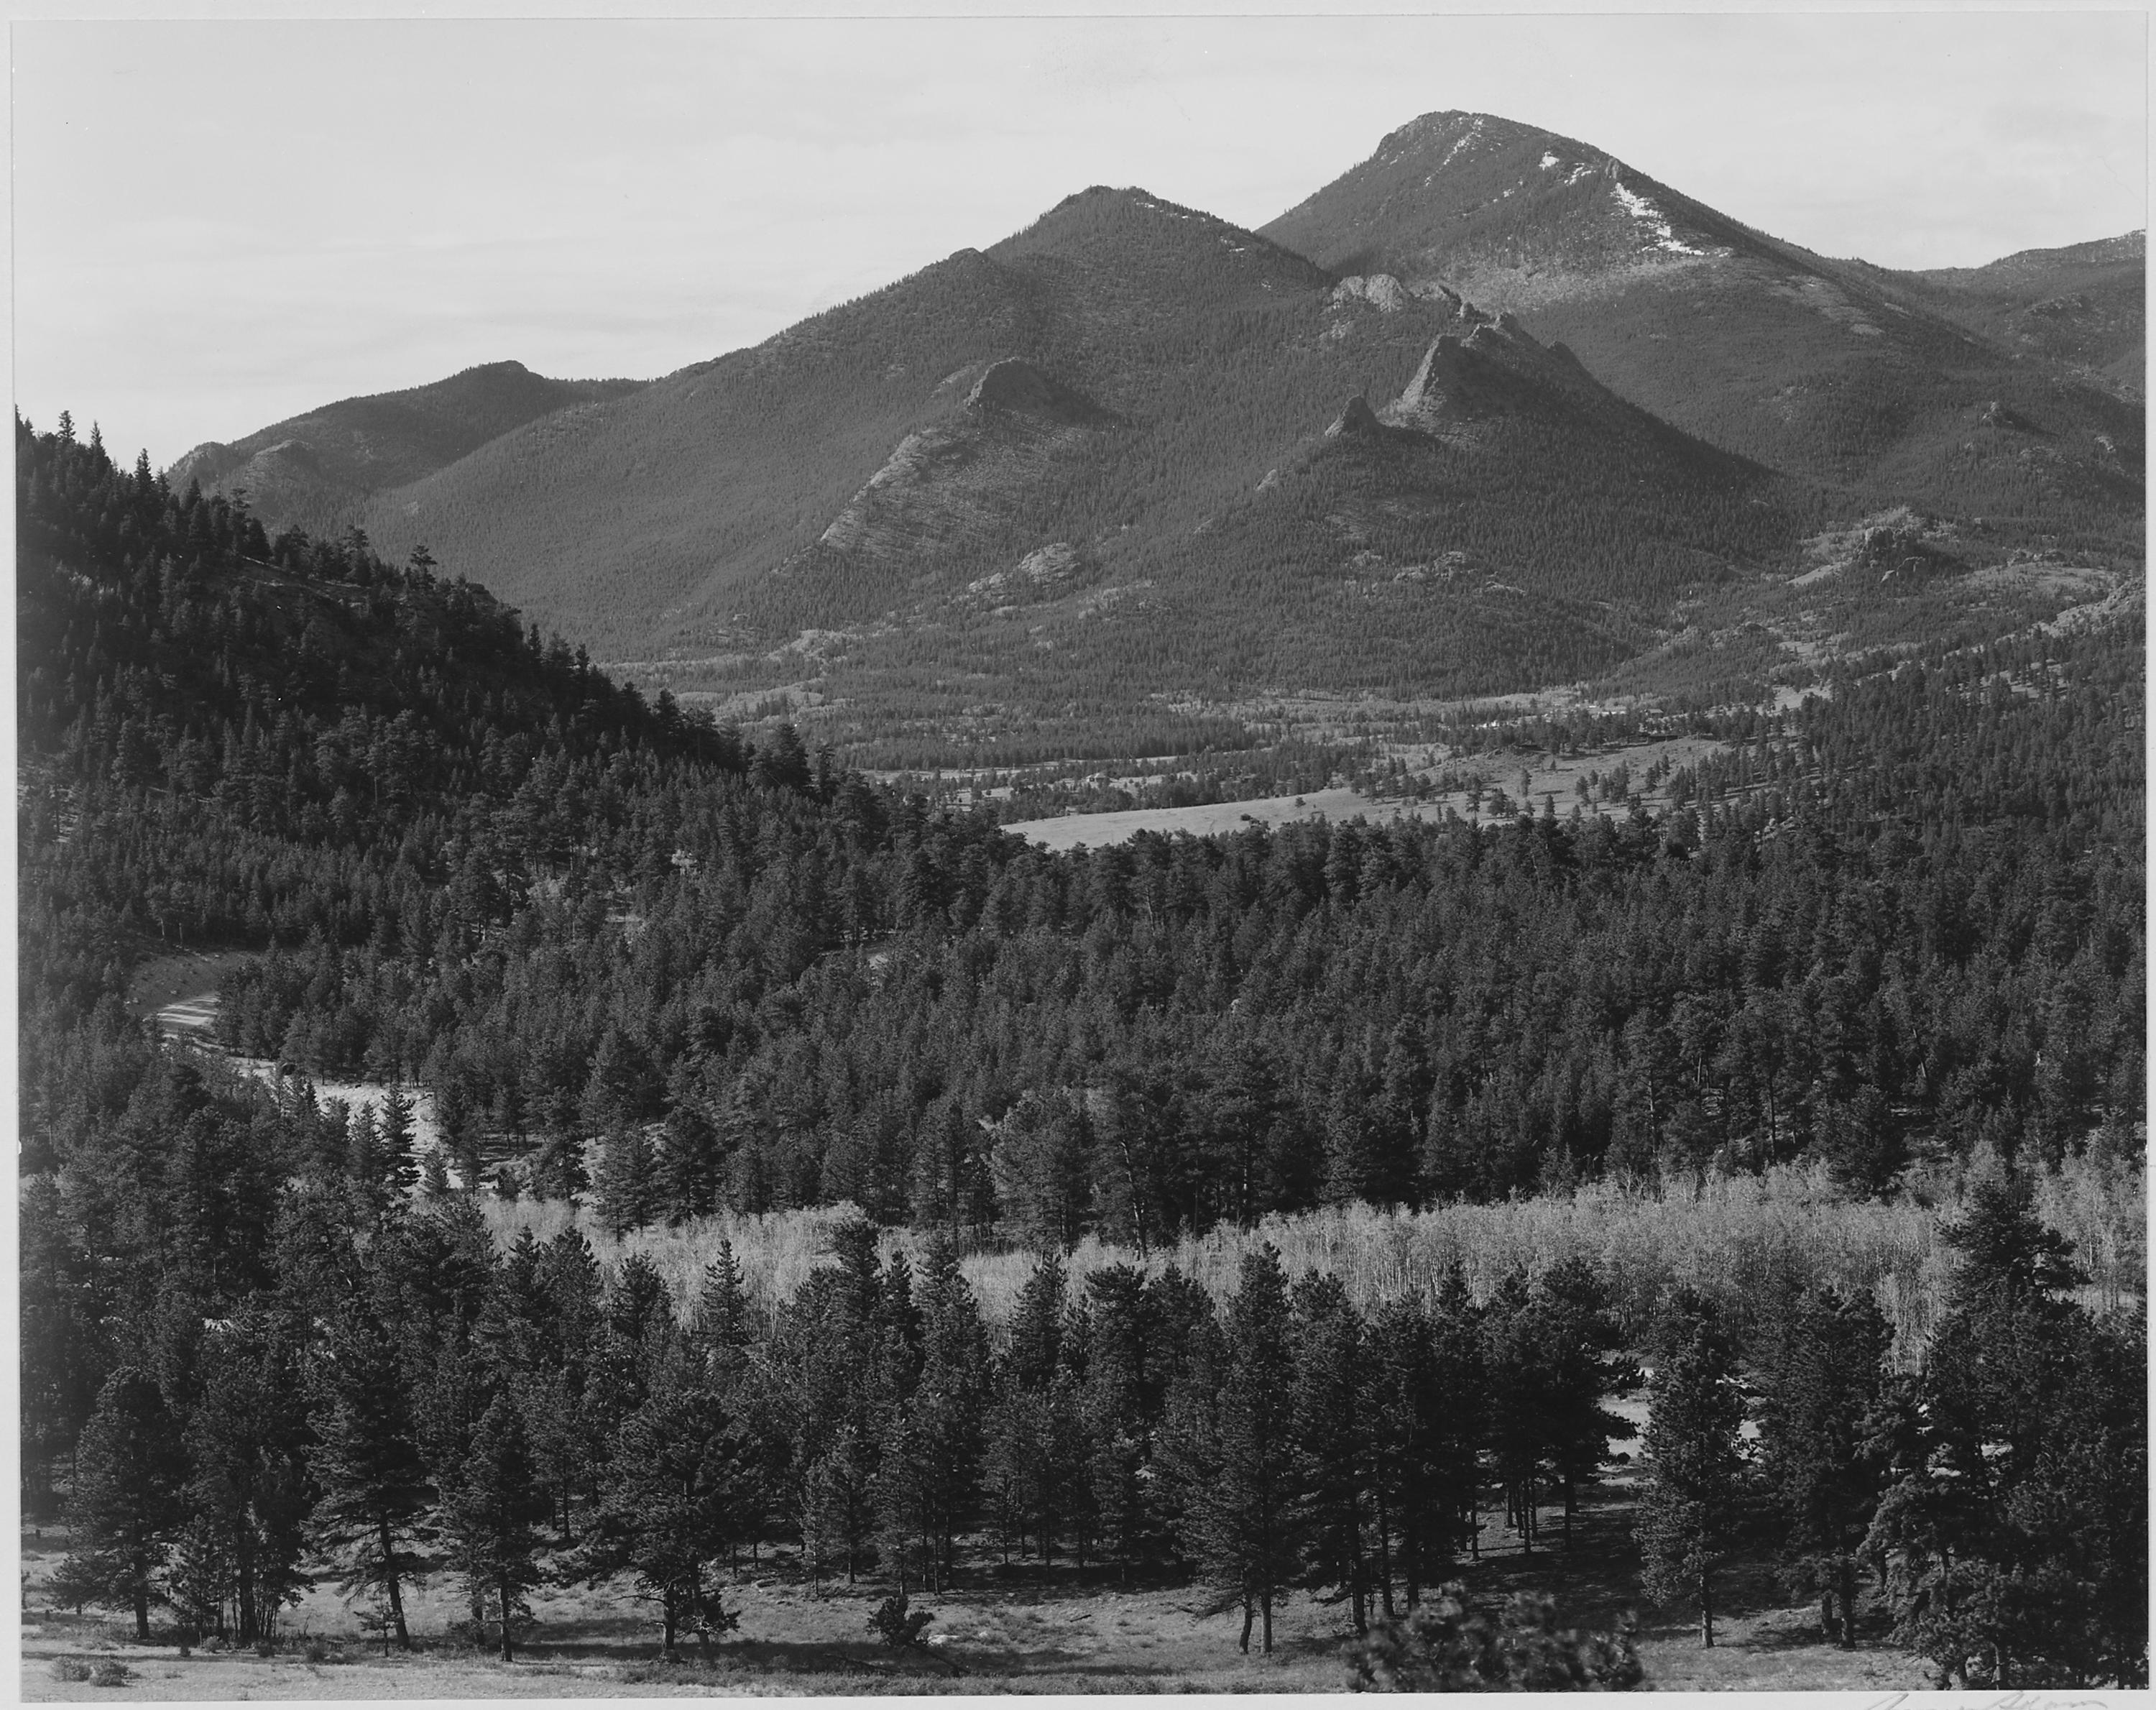 Ansel Adams - National Archives 79-AA-M18